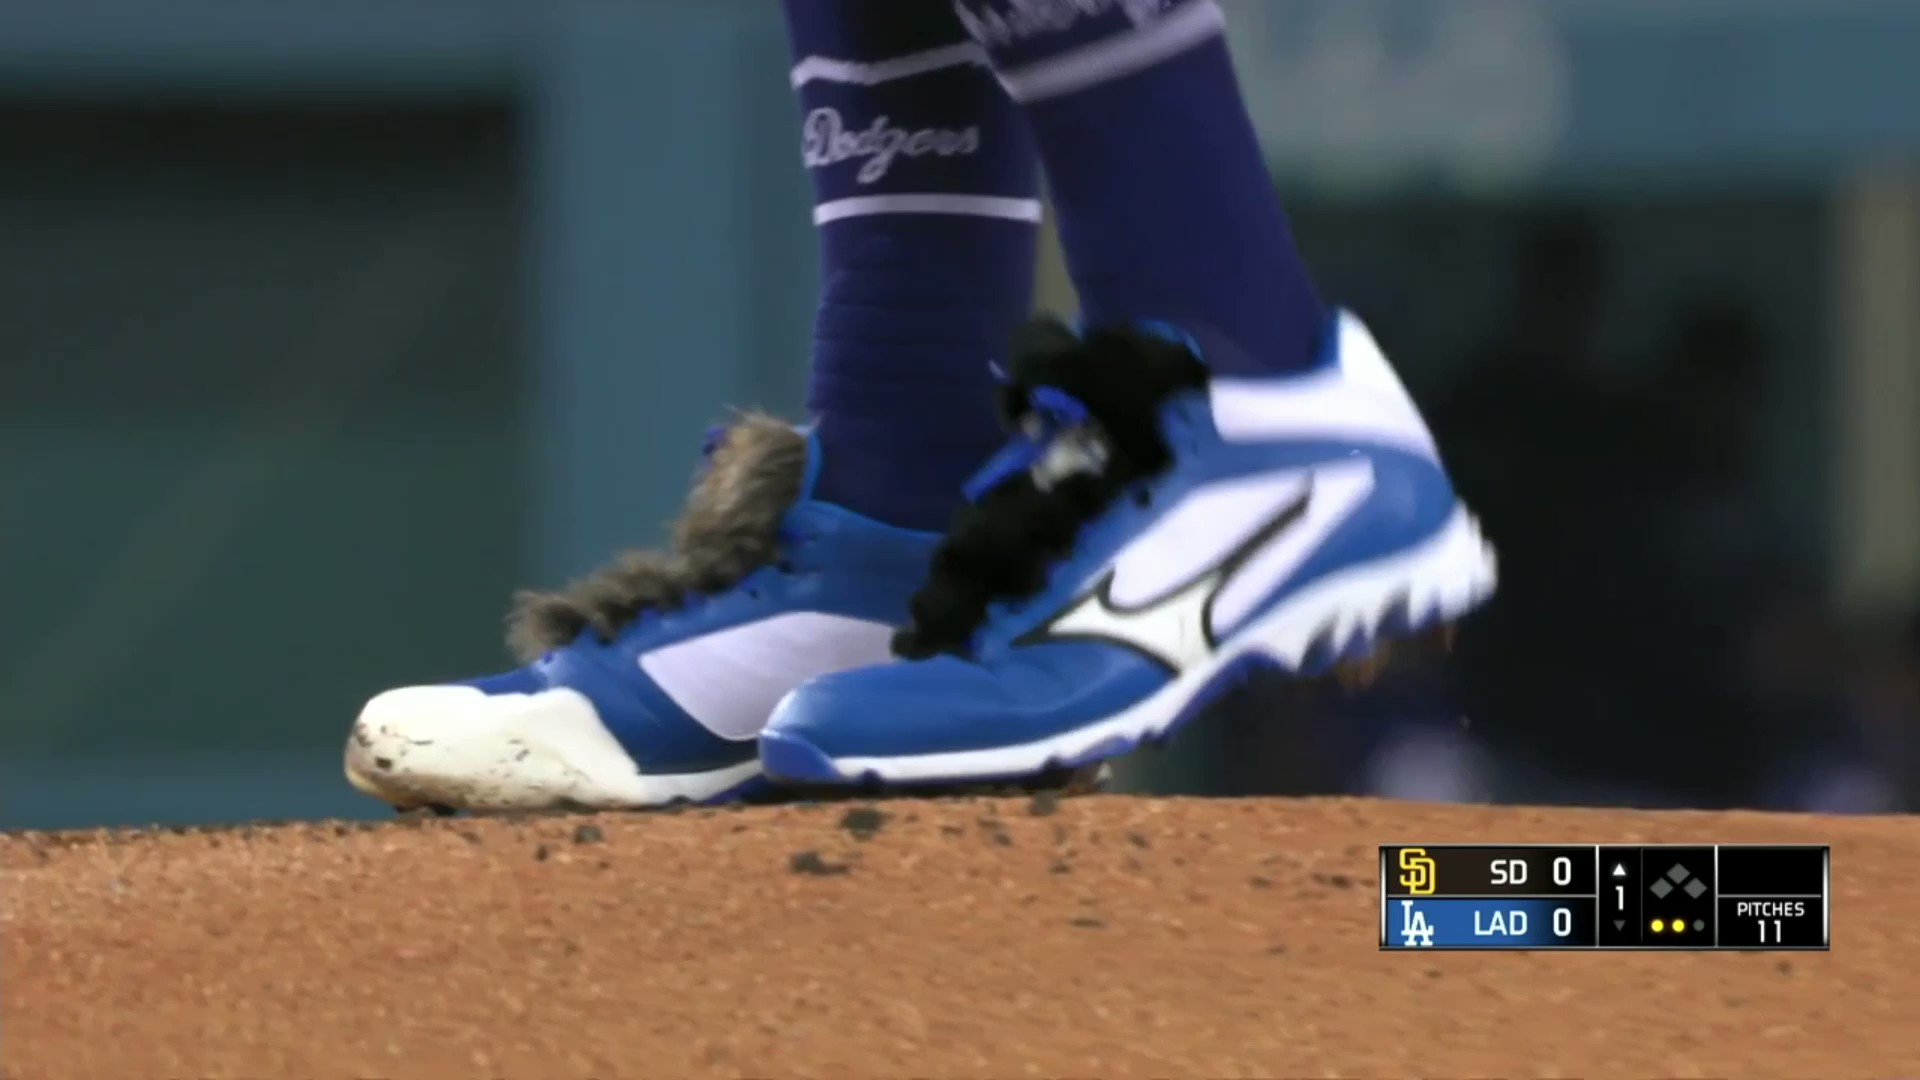 gonsolin cat cleats